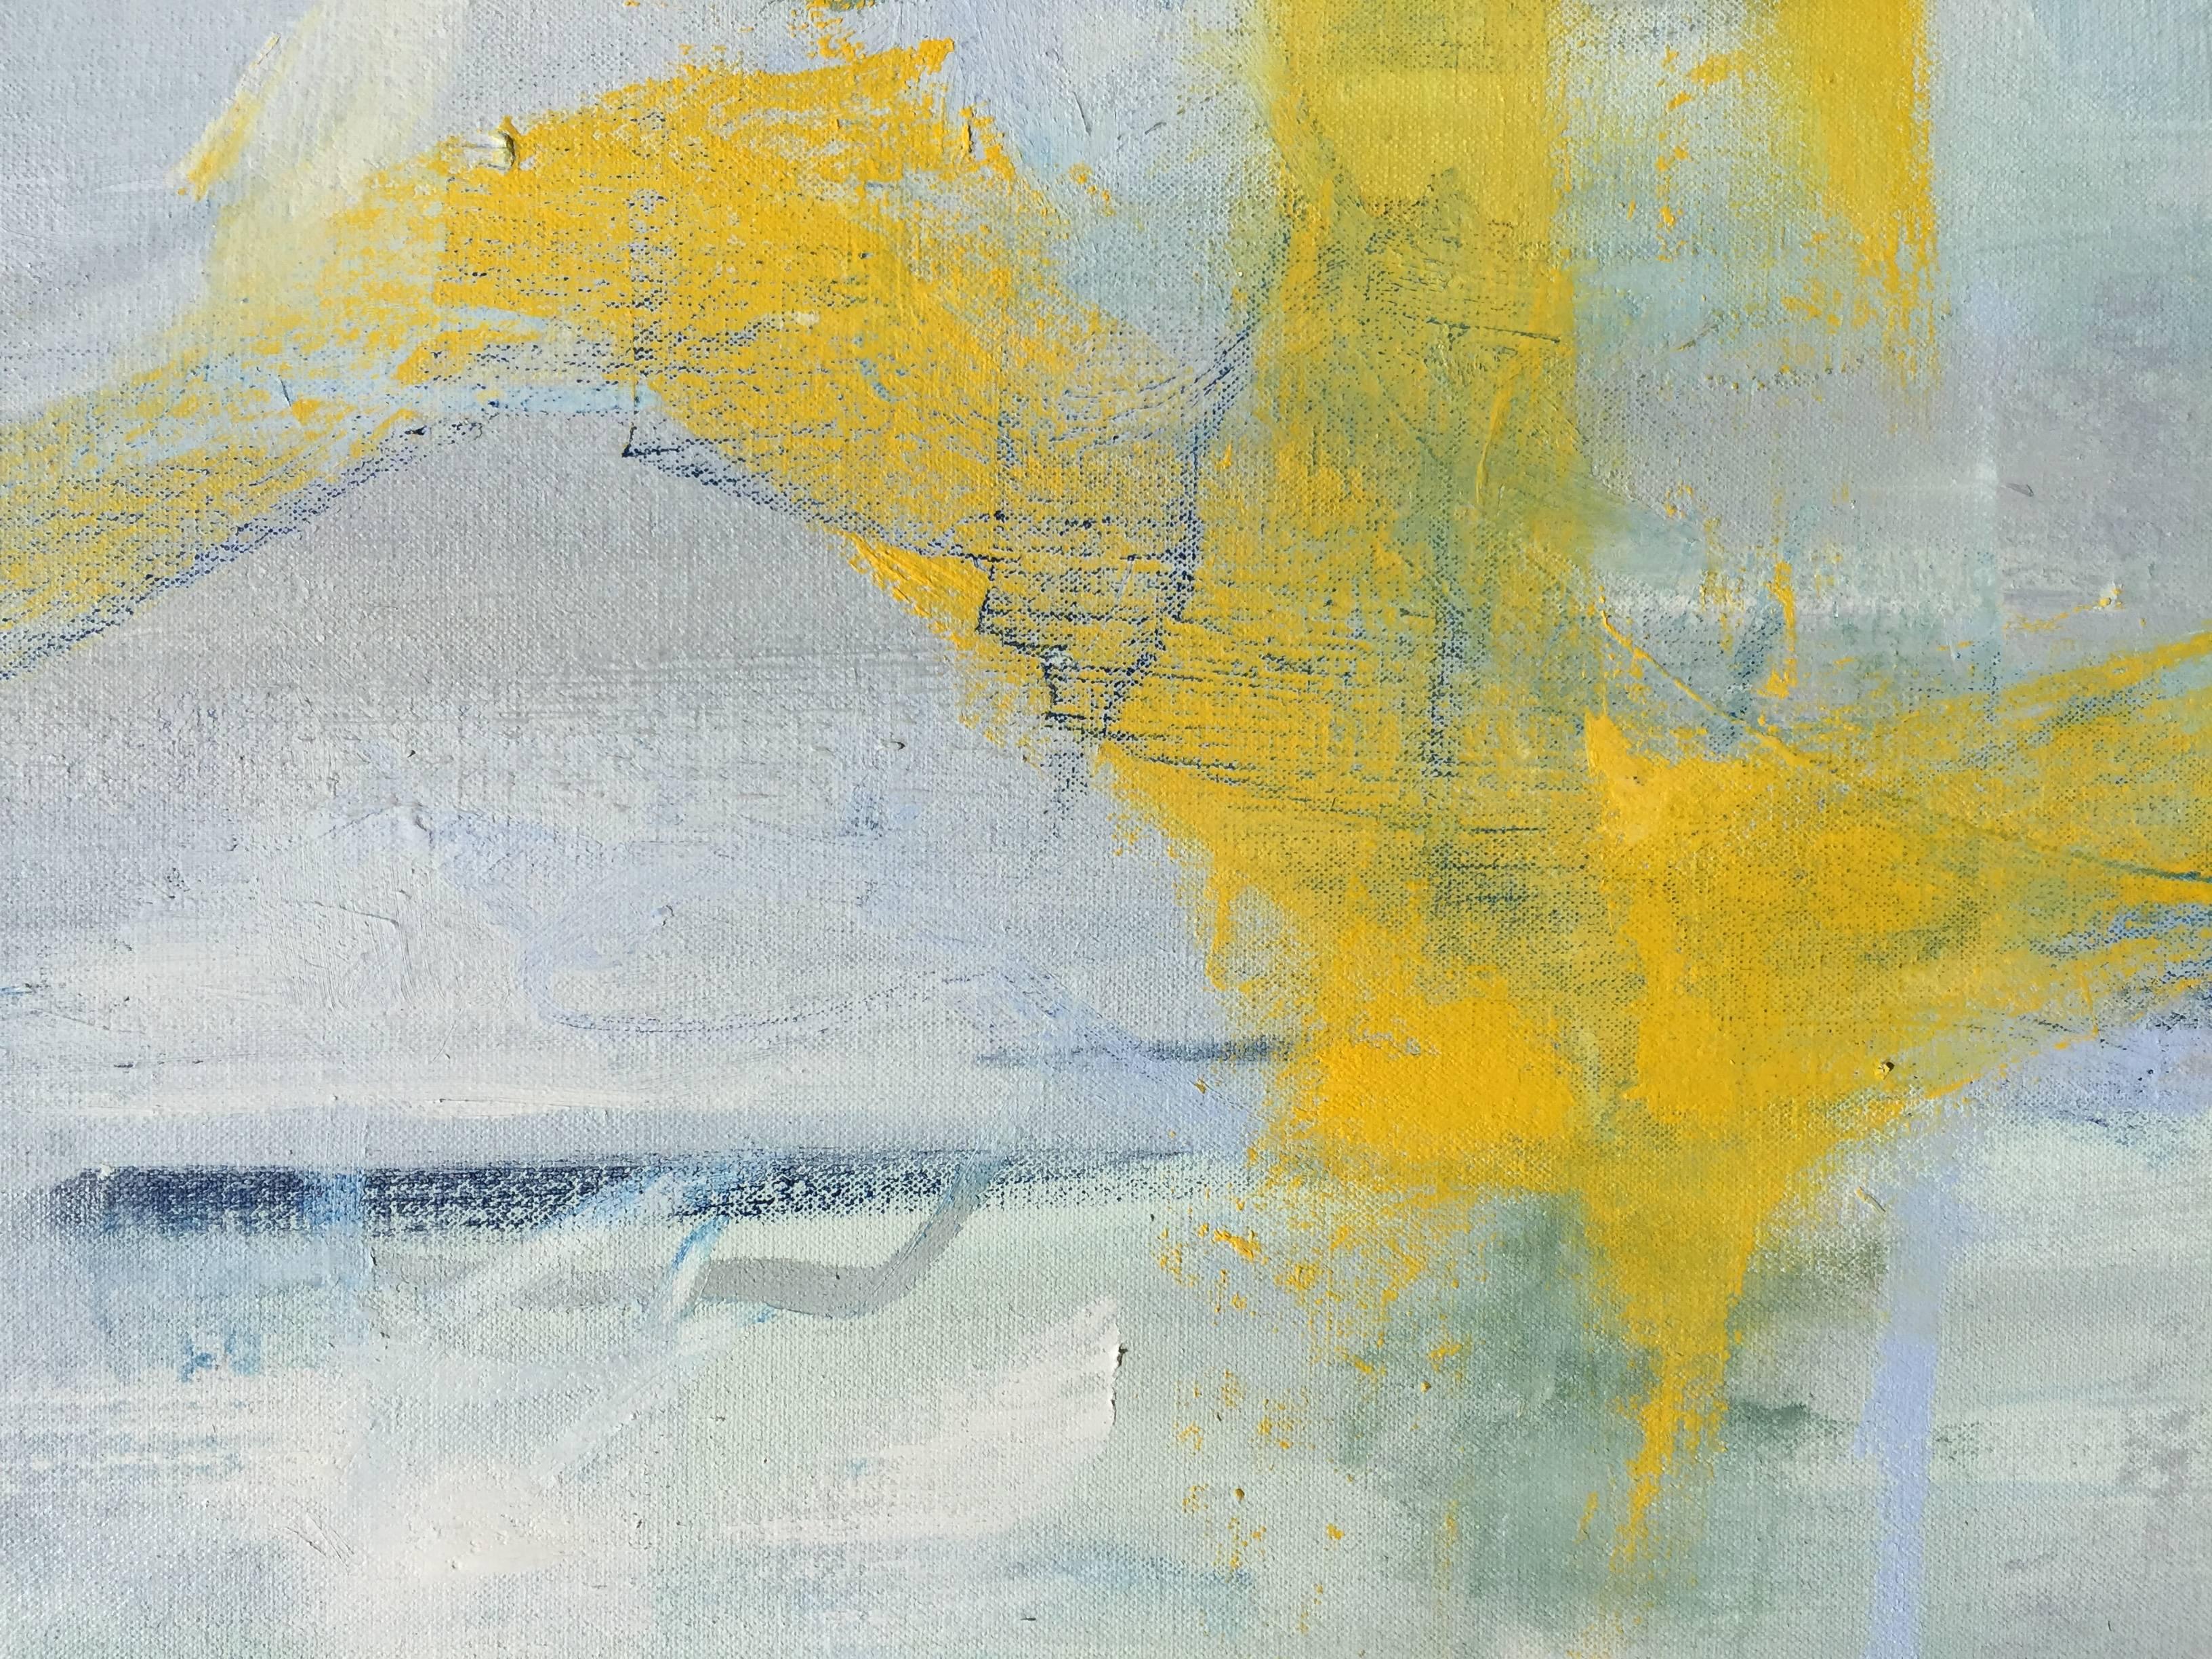 THE YELLOW CHANNEL - Painting by Emilia Dubicki